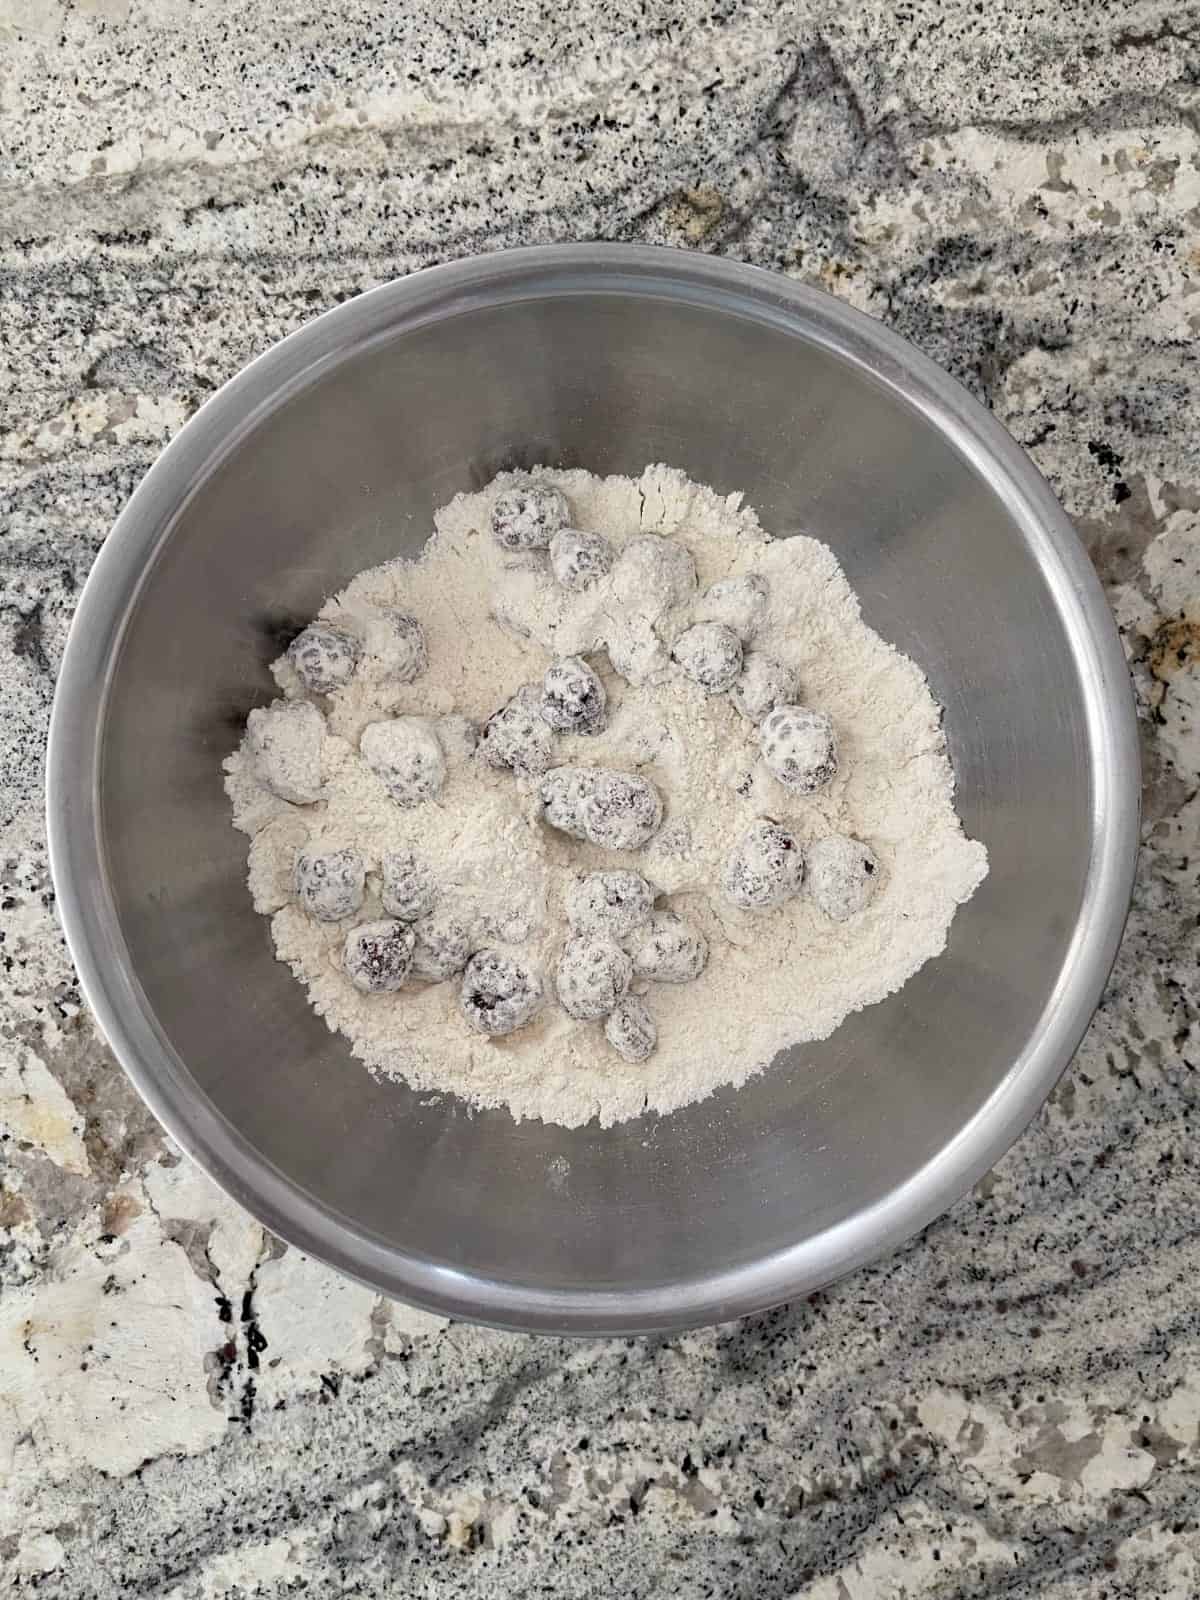 Blackberries coated in flour mixture in stainless mixing bowl.